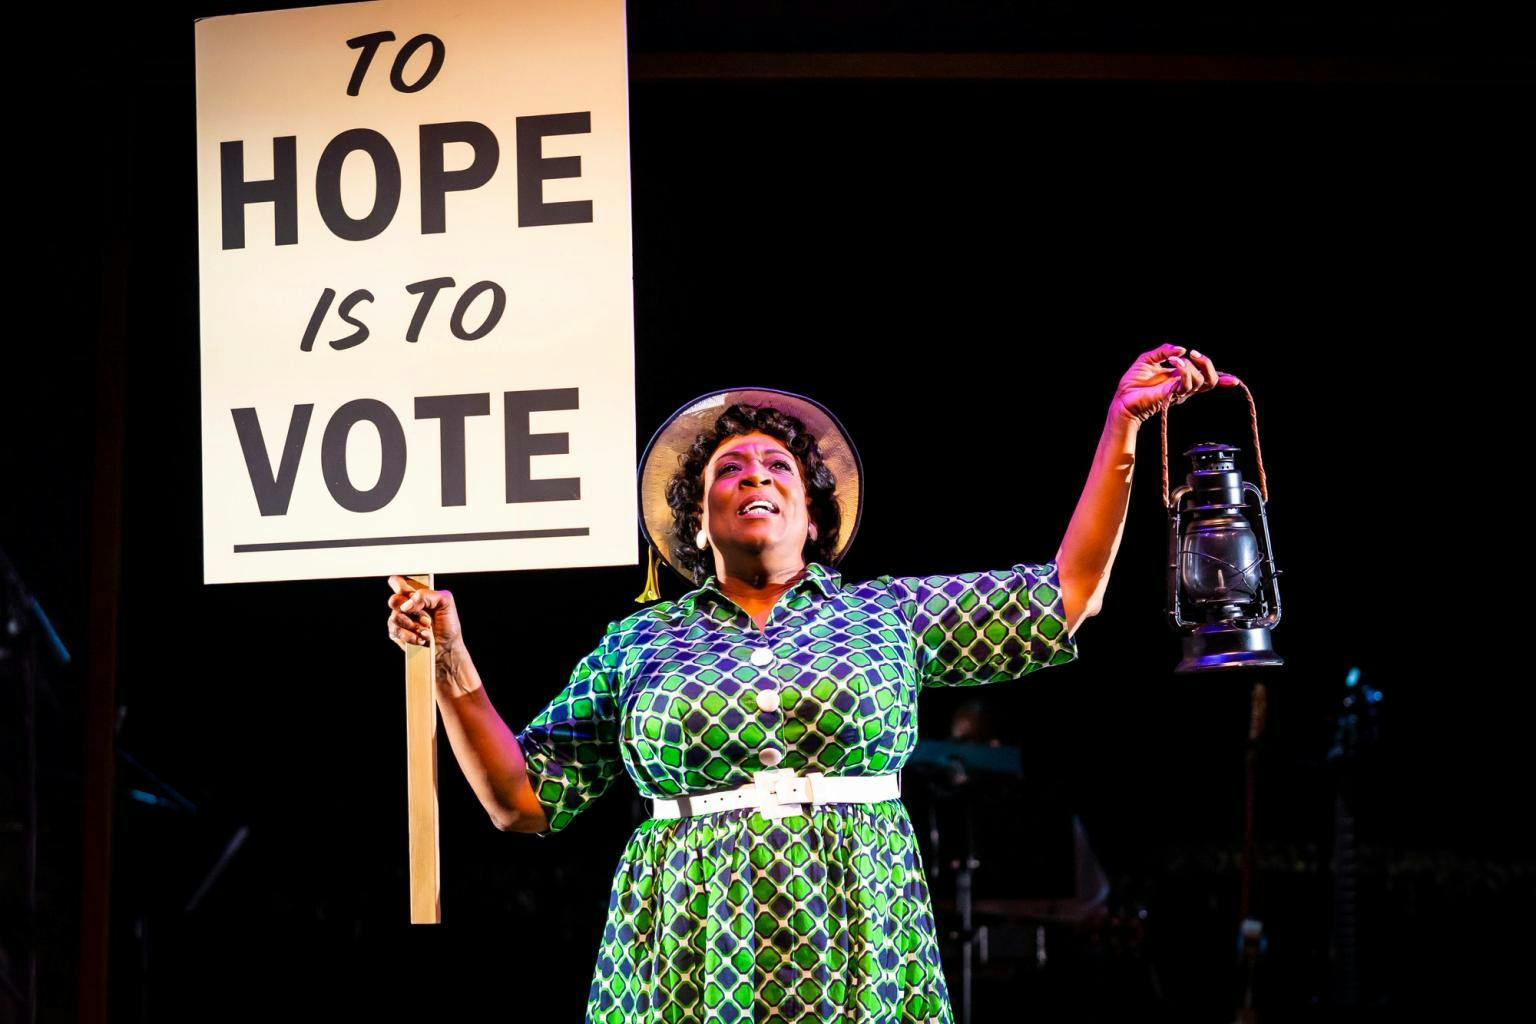 A woman in period costume holds a sign that reads "To hope is to vote" in one hand and a lantern in the other